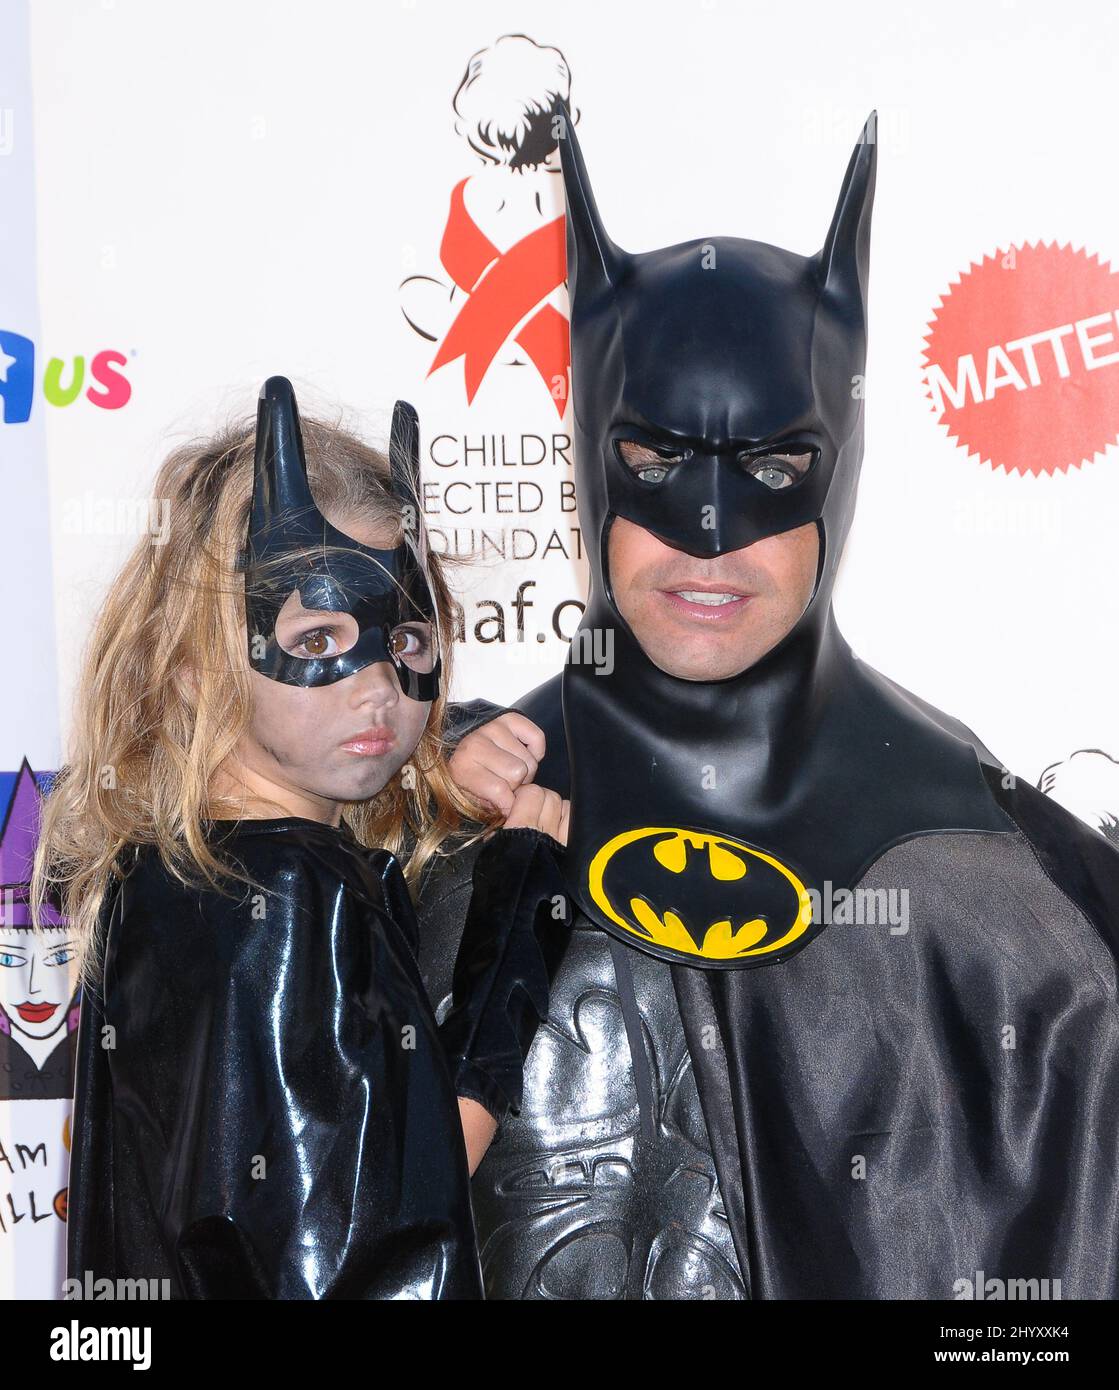 David Charvet and daughter Heaven at the 17th Annual Dream Halloween benefiting Children Affected by Aids Foundation presented by Mattel and Toys 'R' US held at Barker Hanger, Santa Monica. Stock Photo